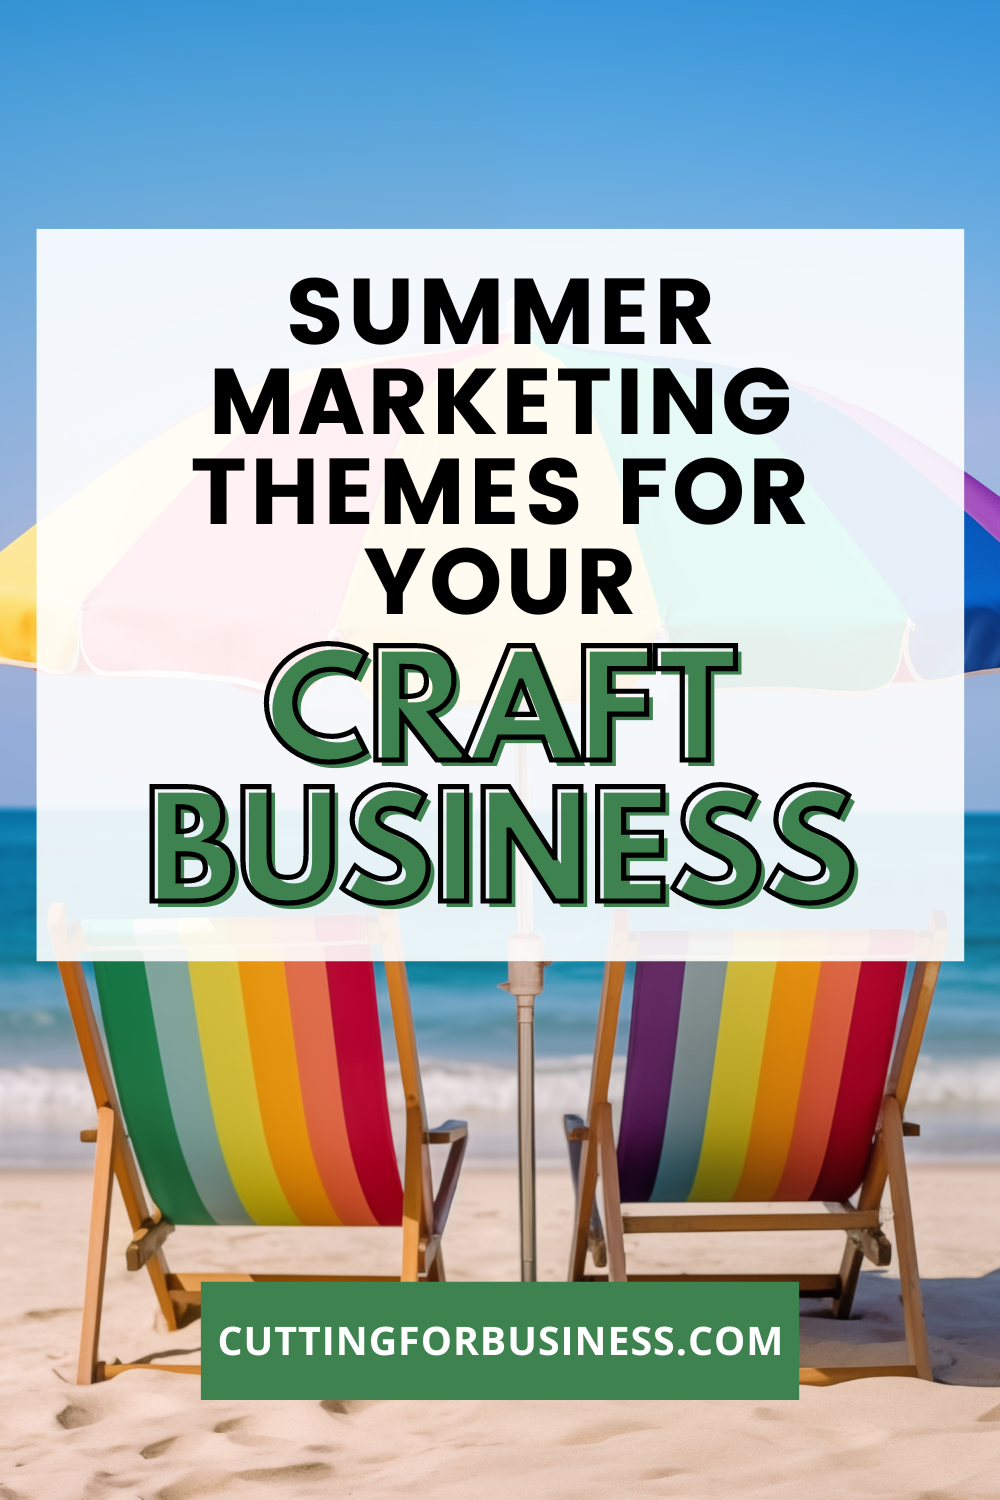 Summer Marketing Themes for Your Craft Business - cuttingforbusiness.com